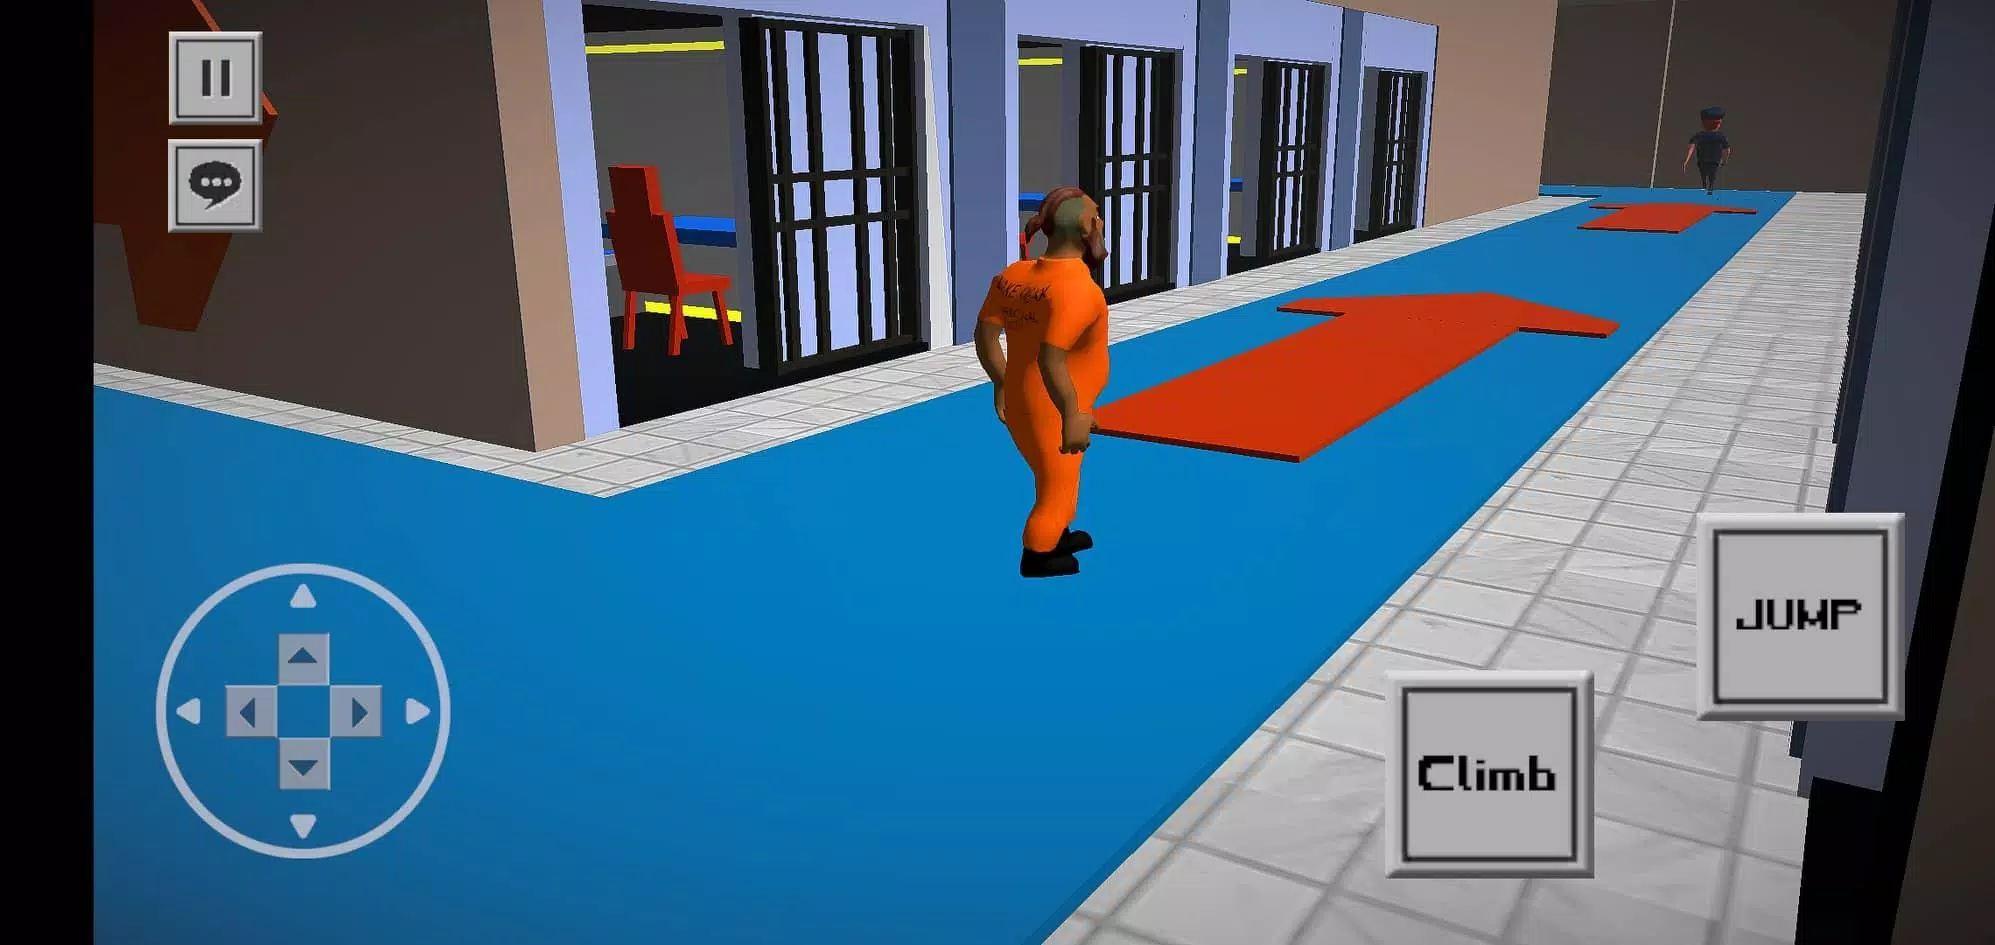 Barry Prison APK for Android Download